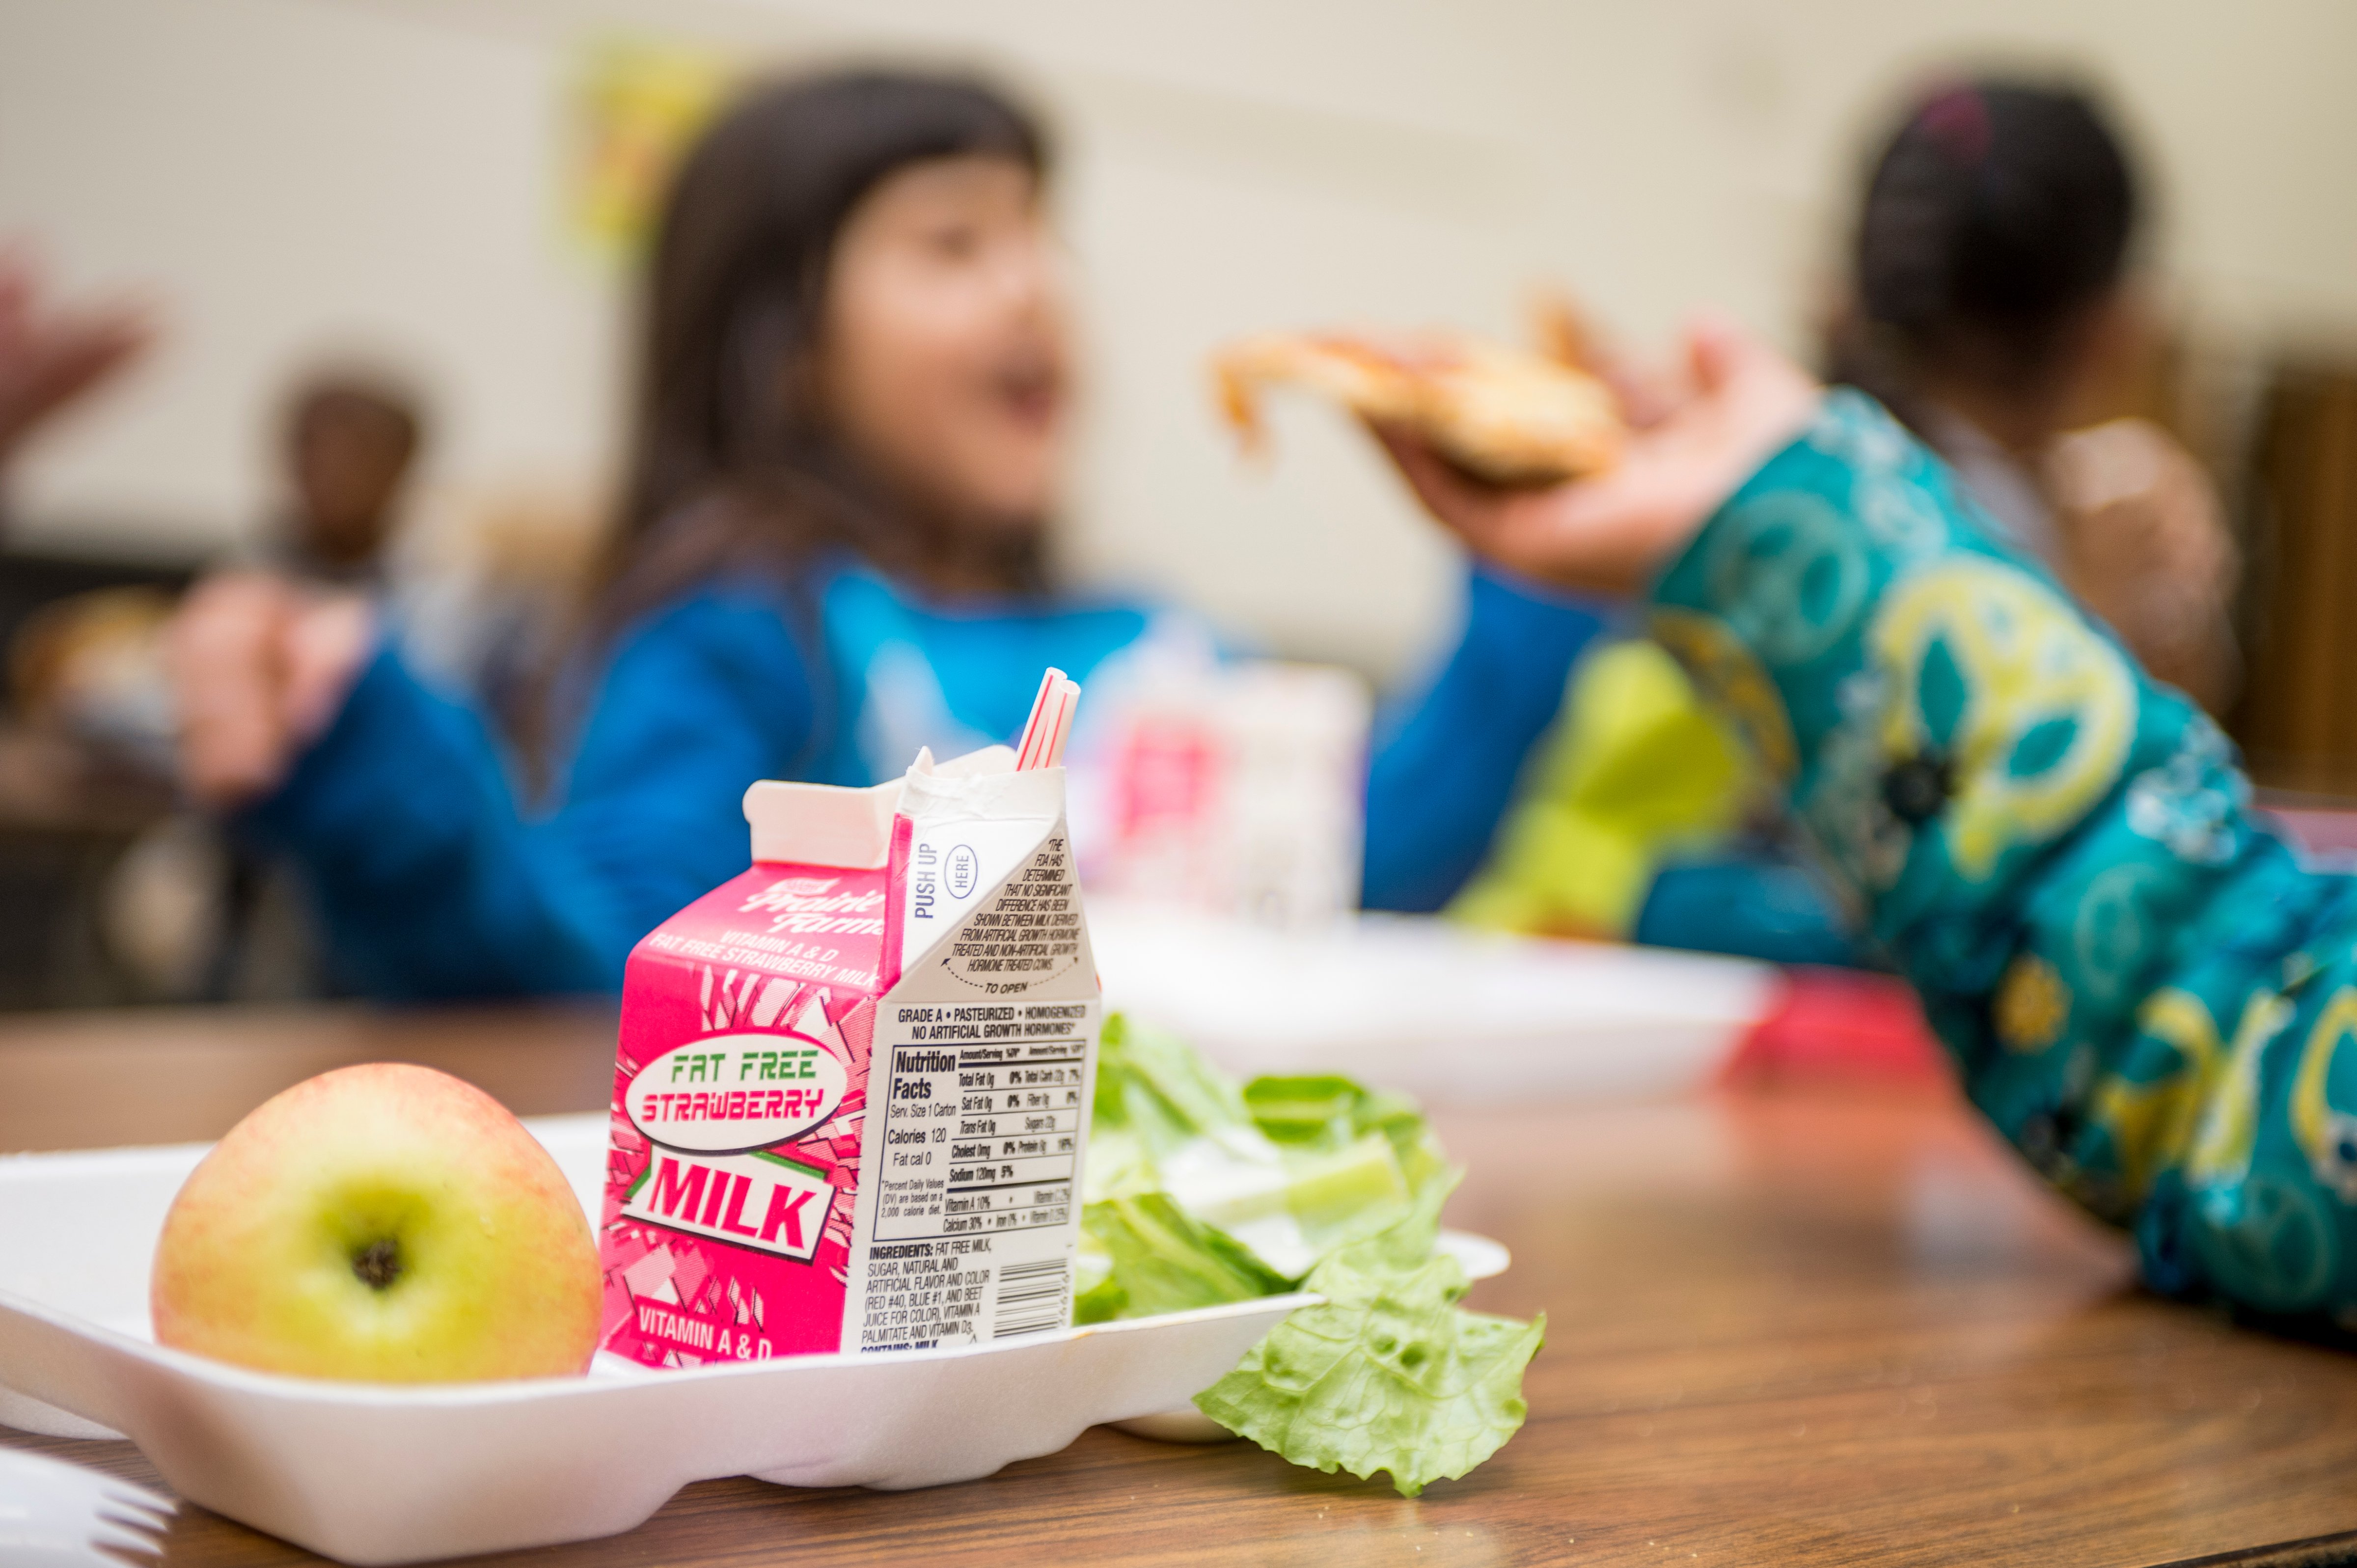 Arcadia Elementary School students eat lunch on Nov. 18, 2016 in Kalamazoo, Michigan. (Ann Hermes—The Christian Science Monitor/Getty Images)